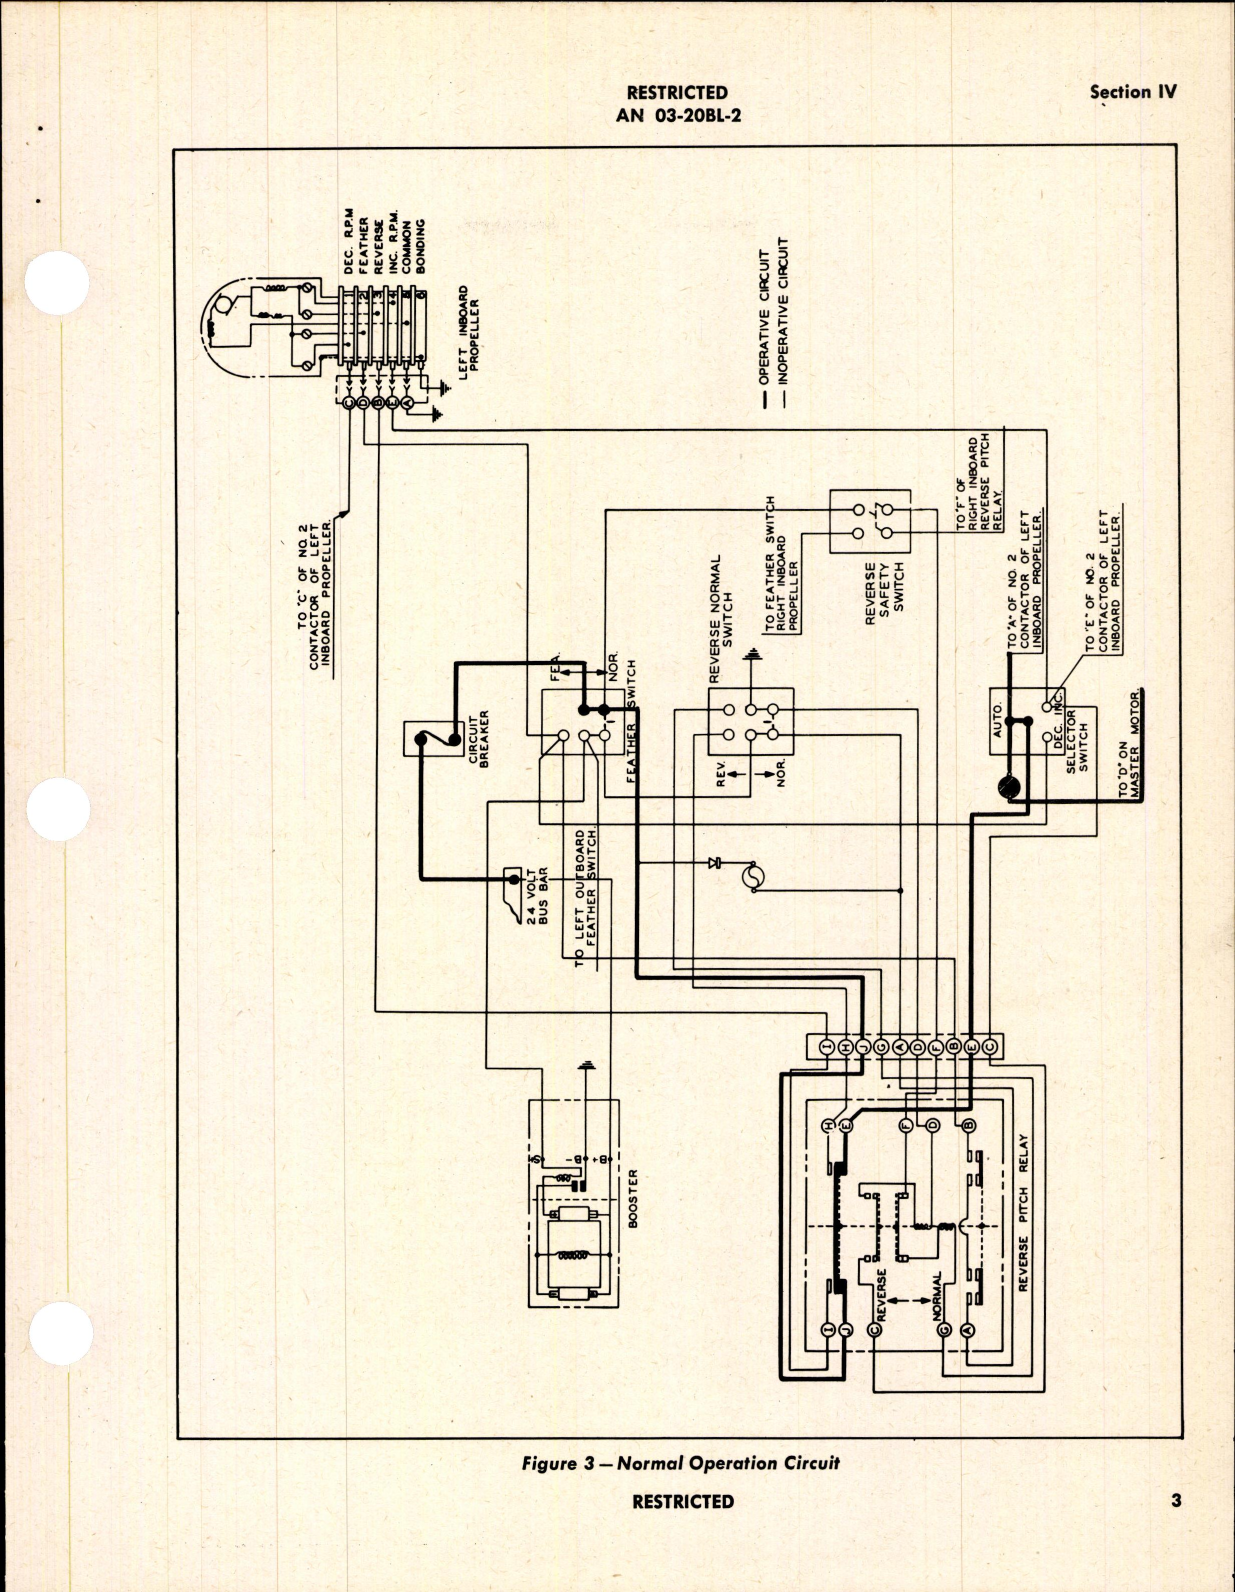 Sample page 7 from AirCorps Library document: Handbook of Instructions with Parts Catalog for Part No 113418 Reverse Pitch Relay